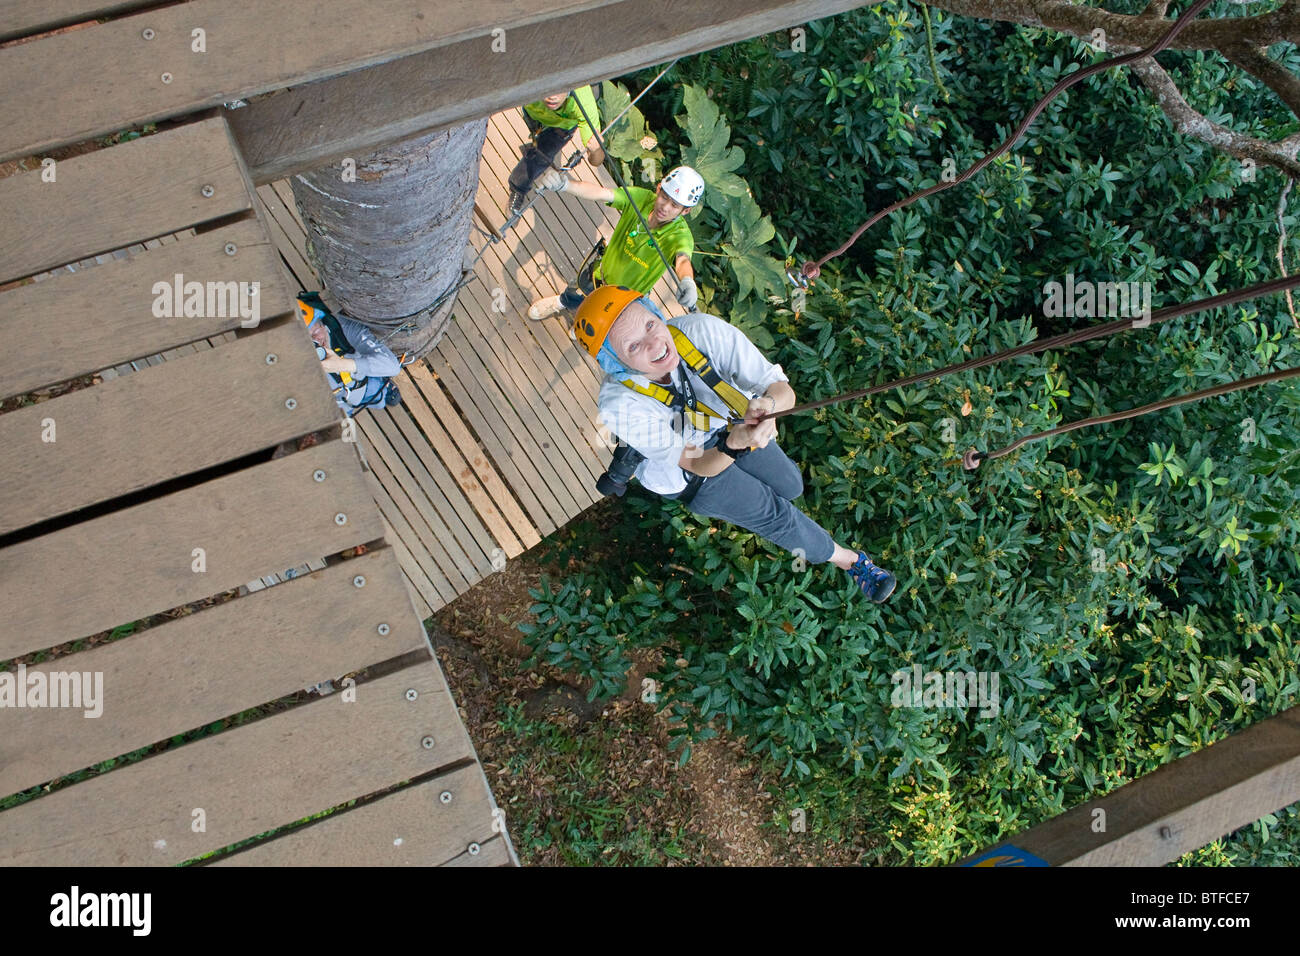 Woman is lowered on one of several 'drops' on ziplines at canopy tour in the Chiang Mai area of Thailand. Stock Photo